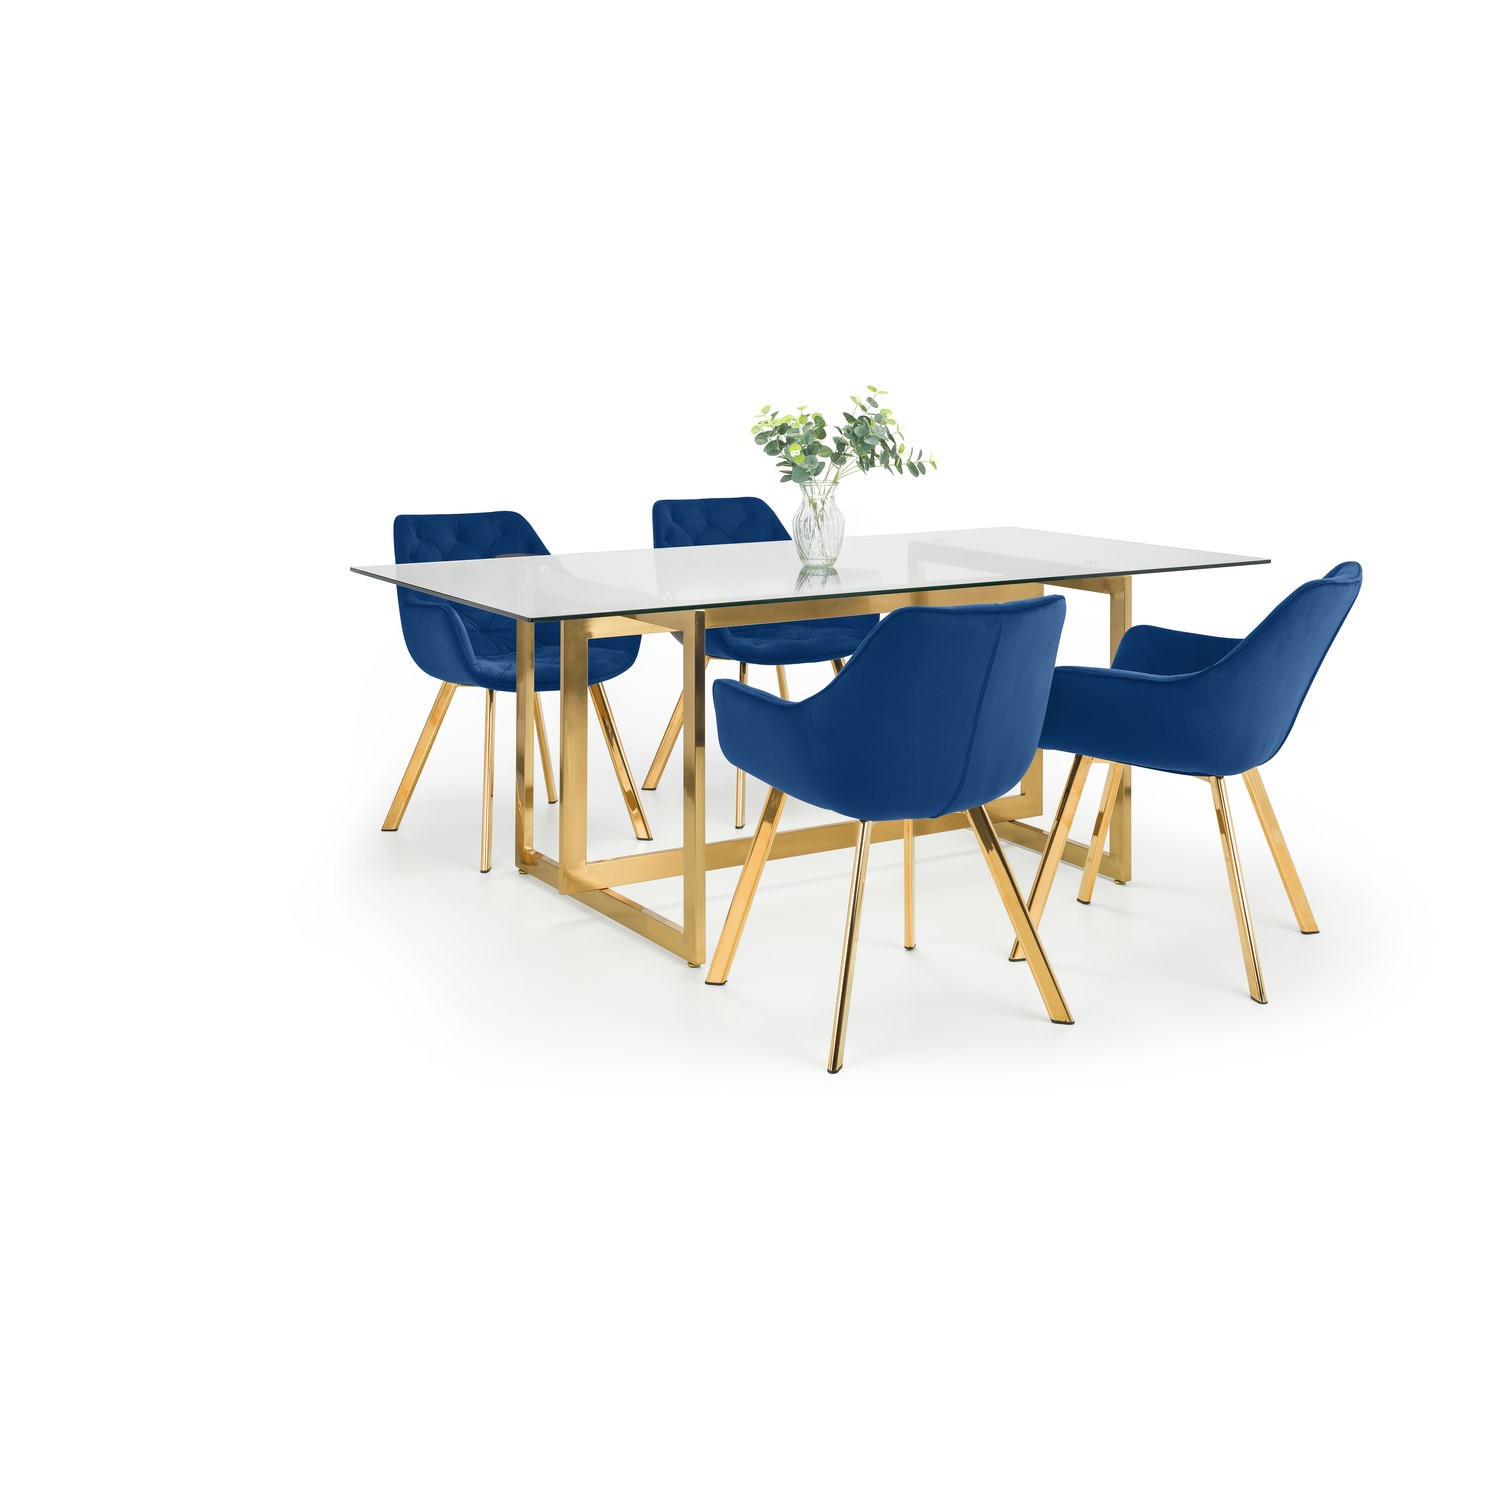 Read more about Glass top dining table with 4 navy velvet dining chairs lorenzo